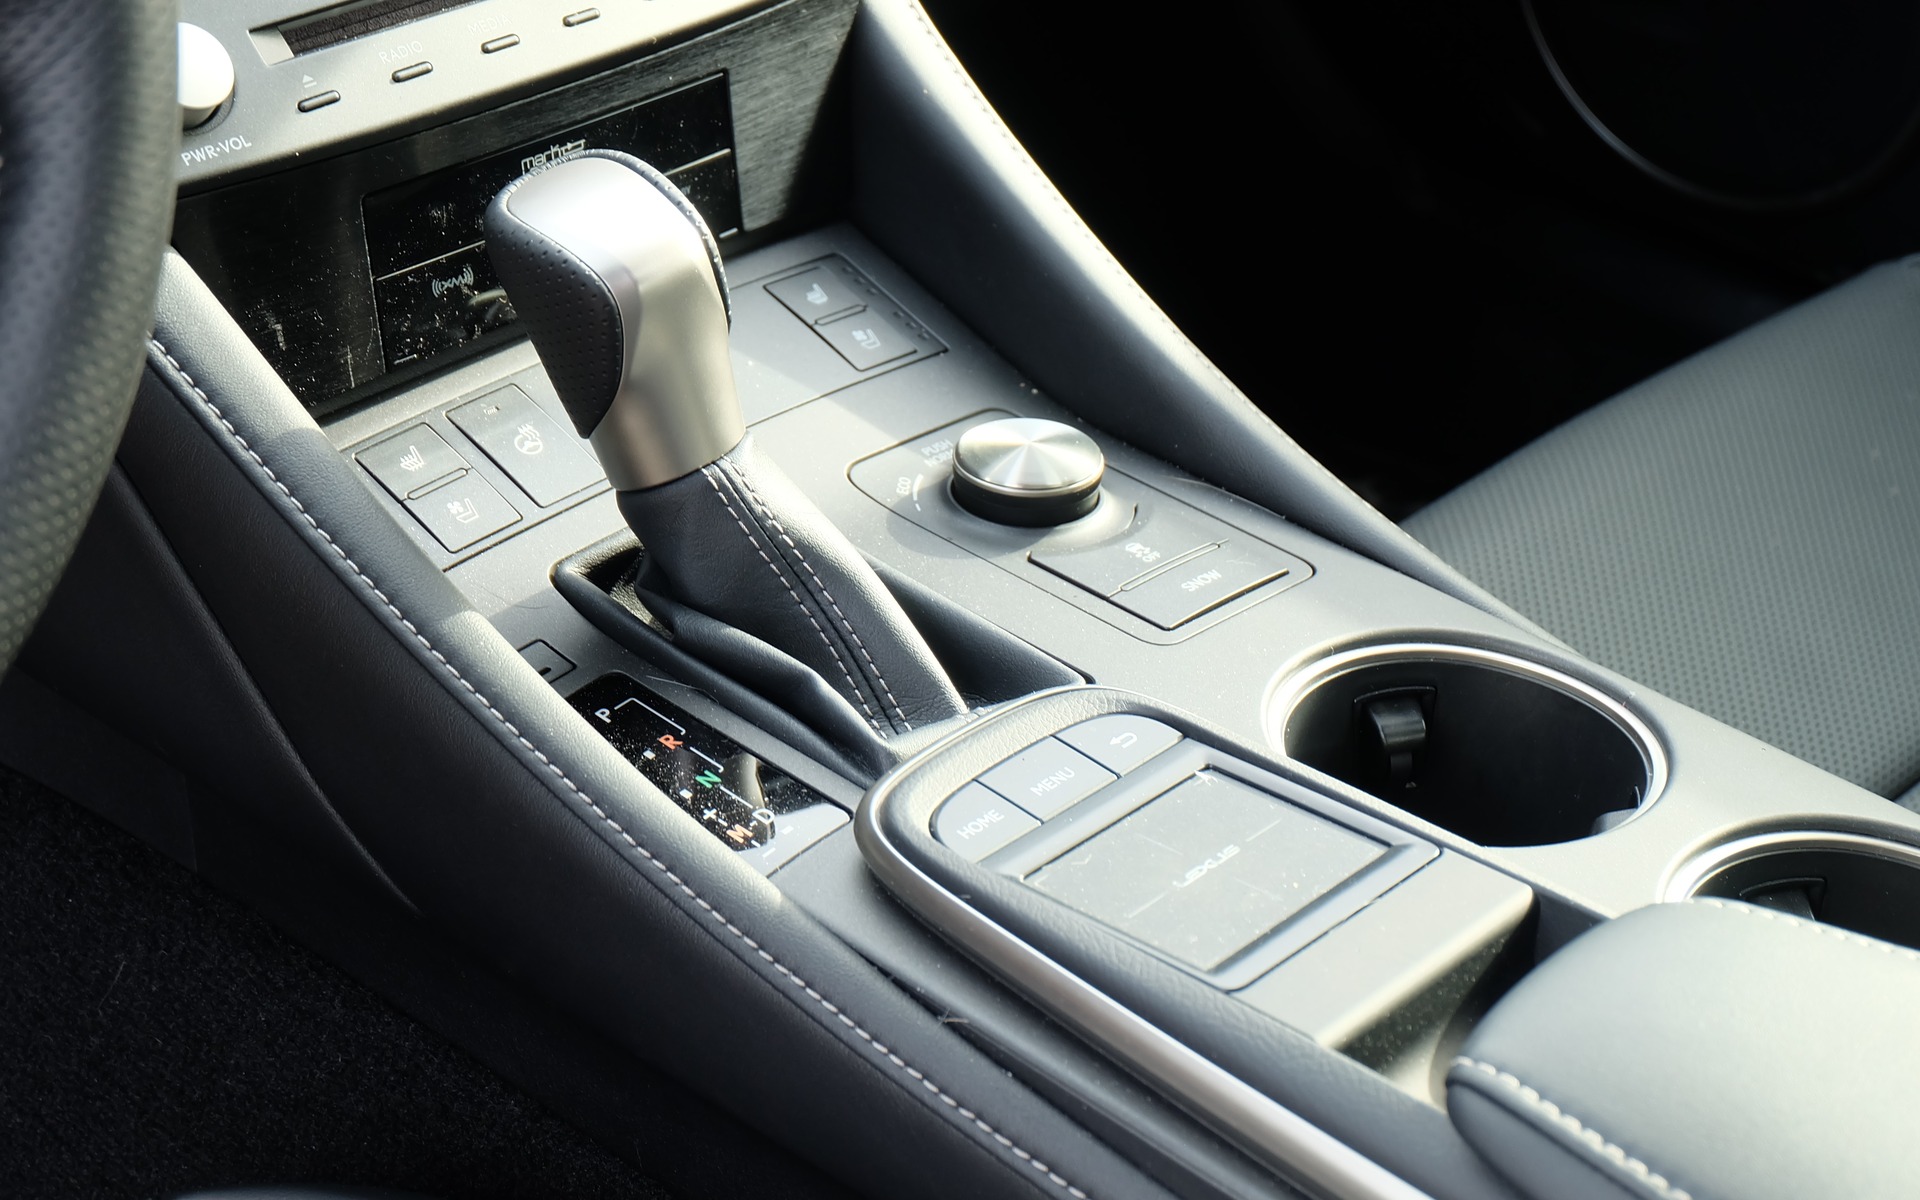 Next to the shift lever is the drive selector.